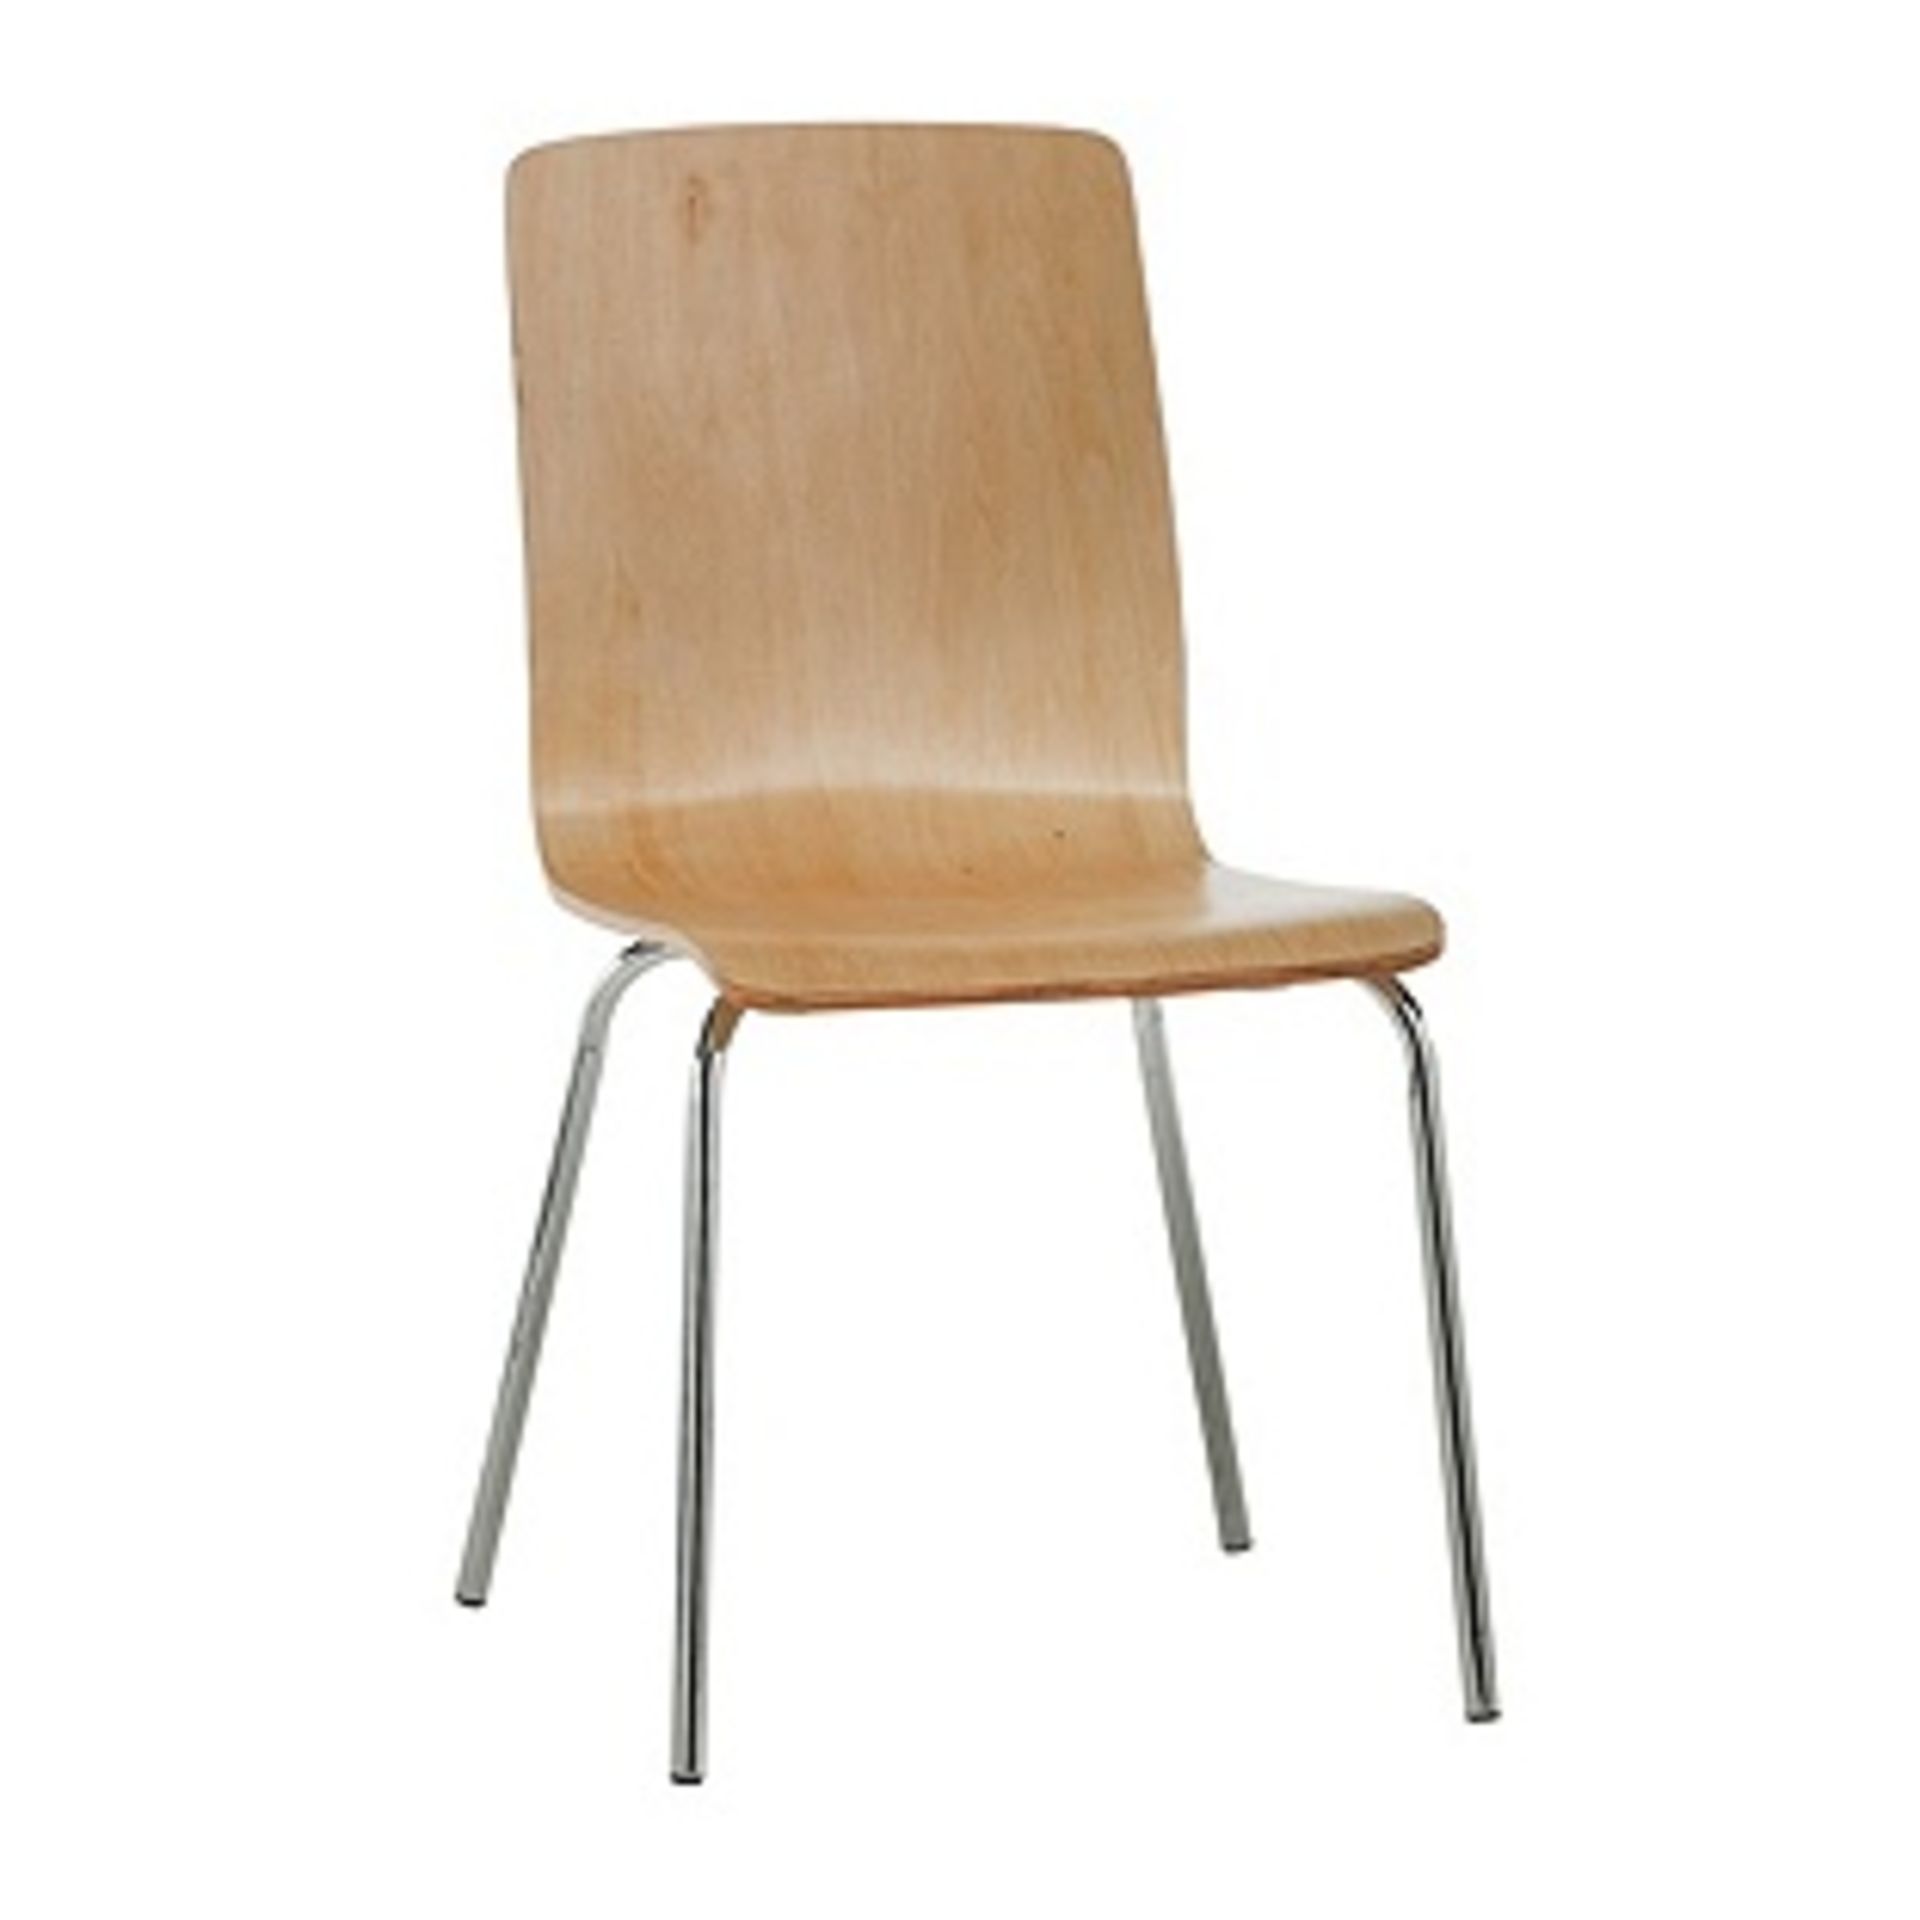 Simple Value Natural Bentwood Dining Chair. Size H87, W45, D46cm. Scratch on Seat. Please Note